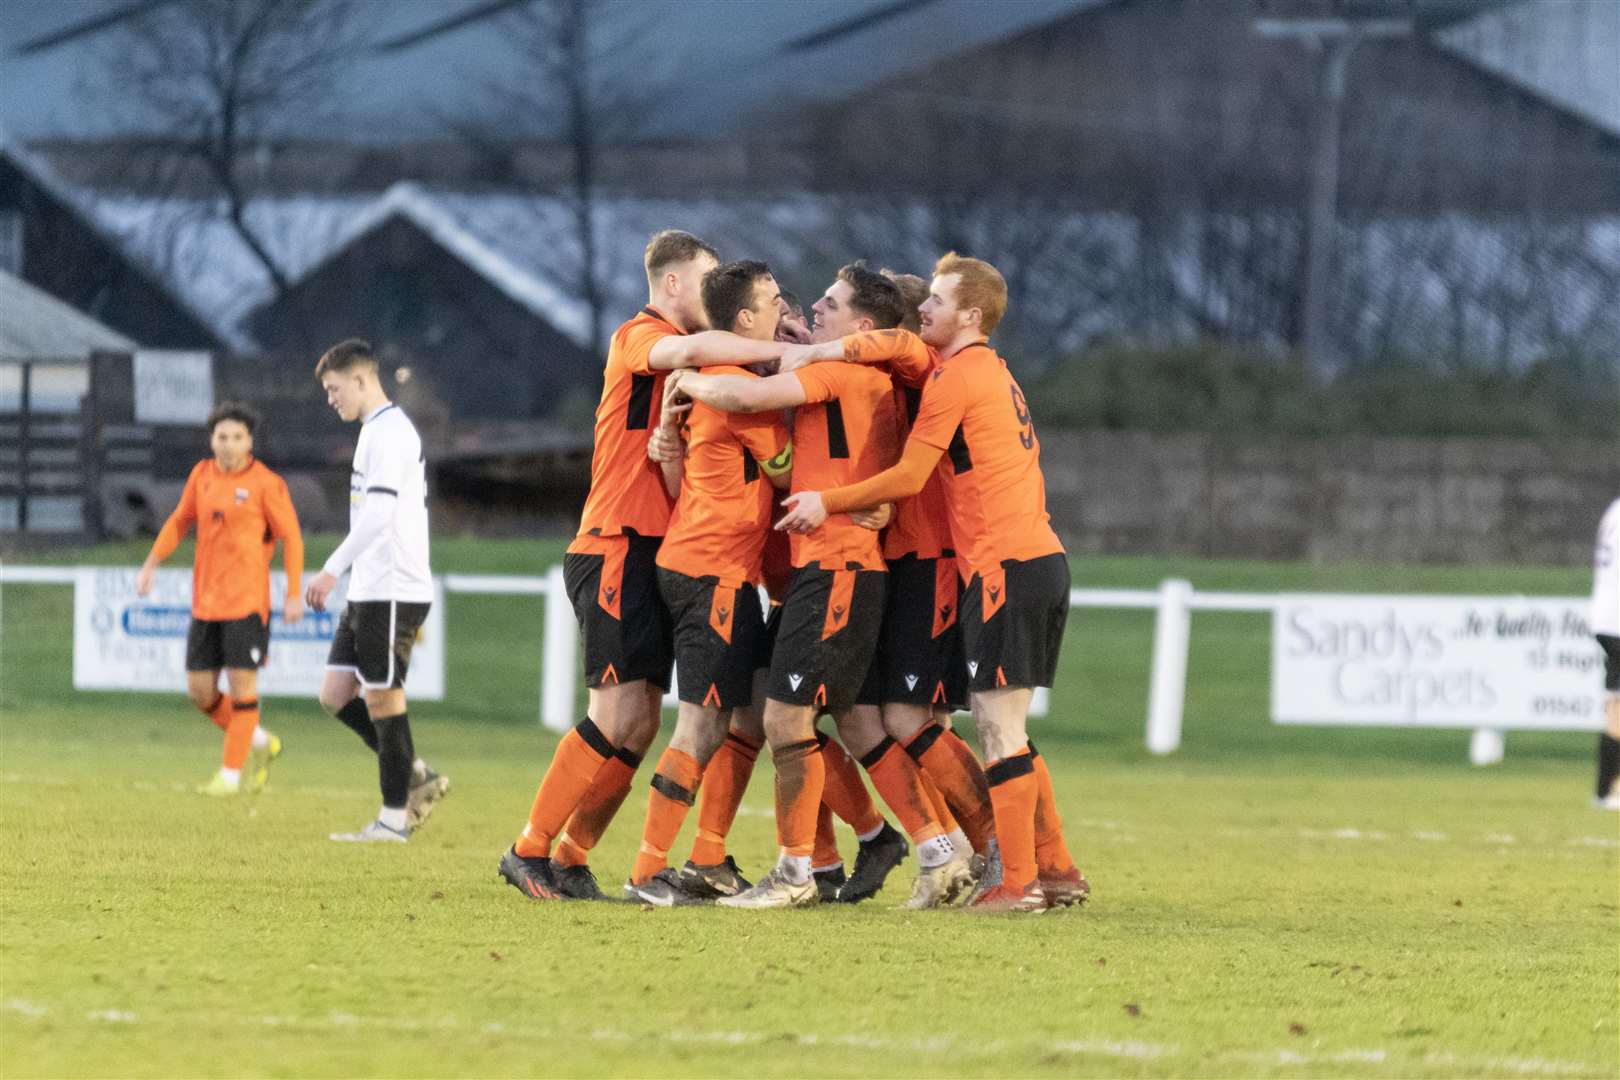 Liam Shewan scored Rothes' second goal against Formartine. Picture: Beth Taylor